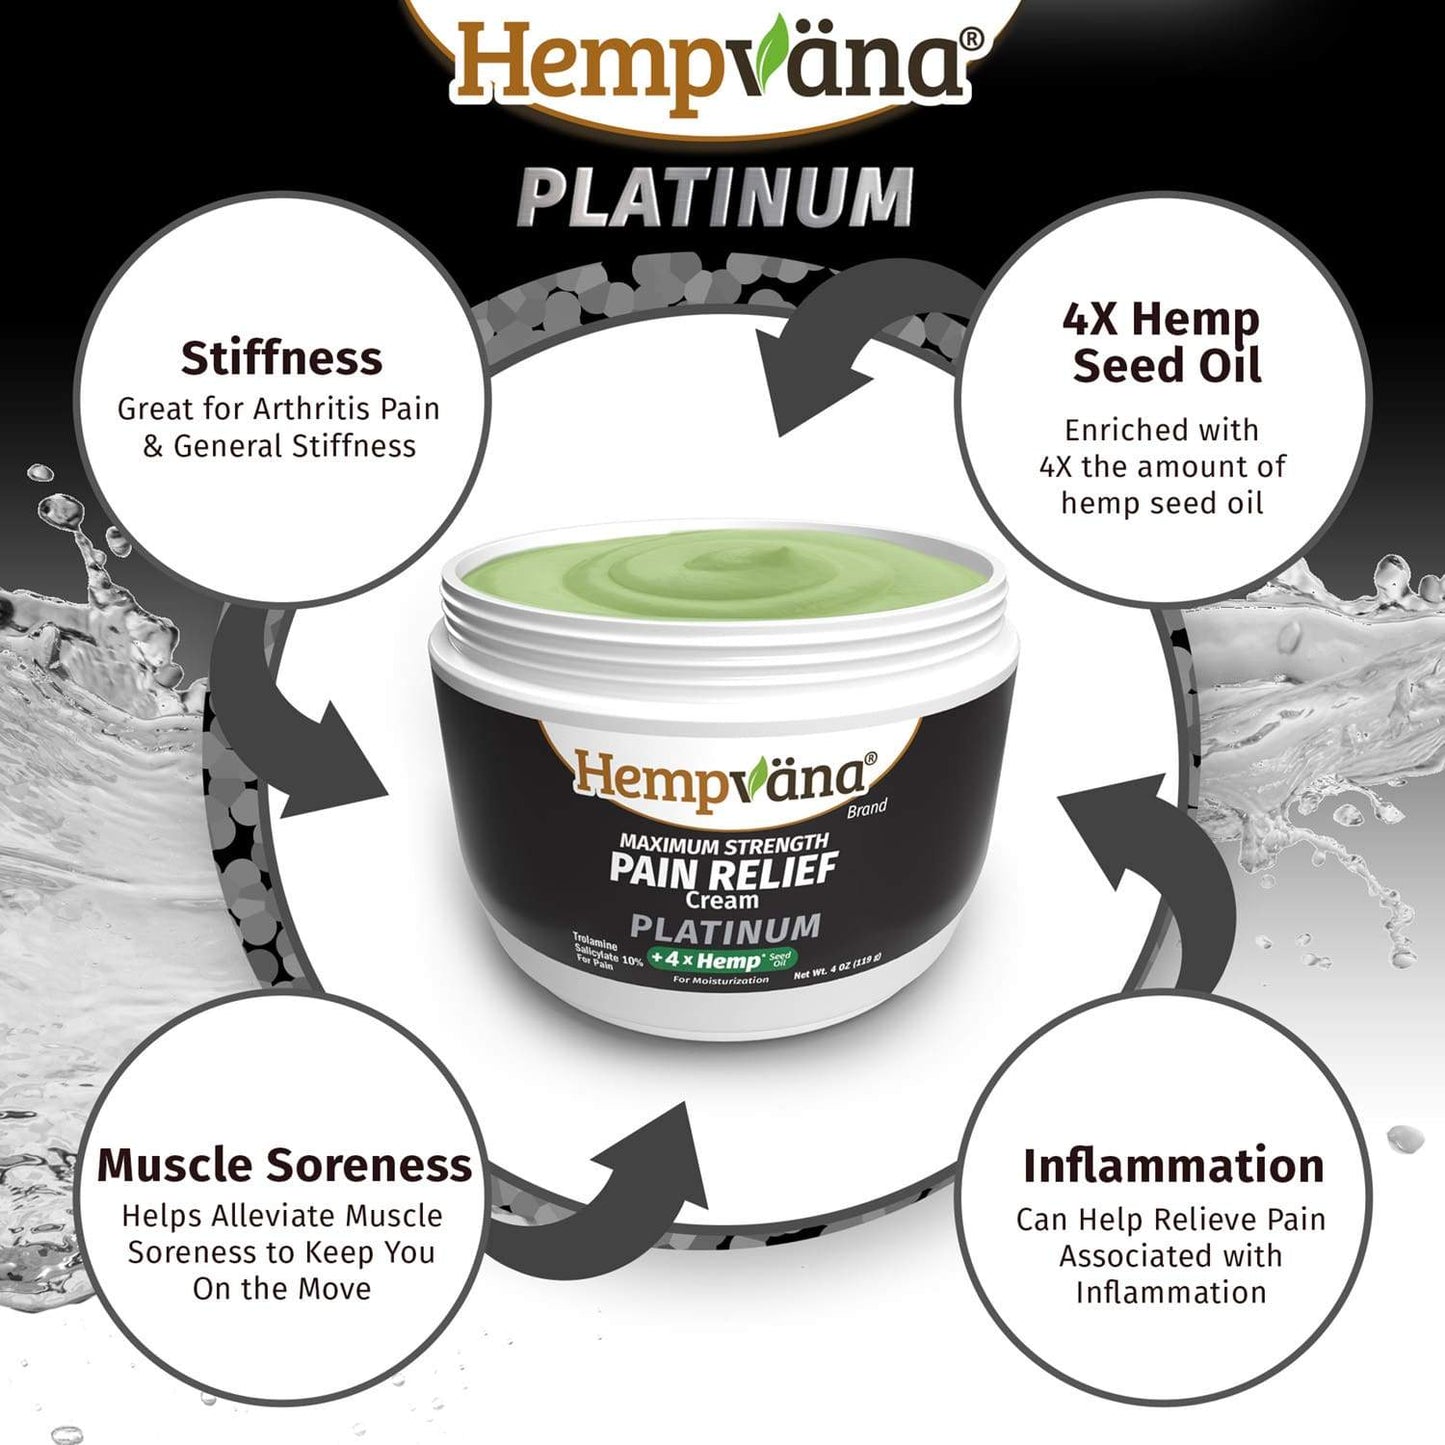 Infographic stating that Hempvana Platinum Pain Relief Cream helps relieve stiffness, muscle soreness and inflammation with 4x hemp seed oil